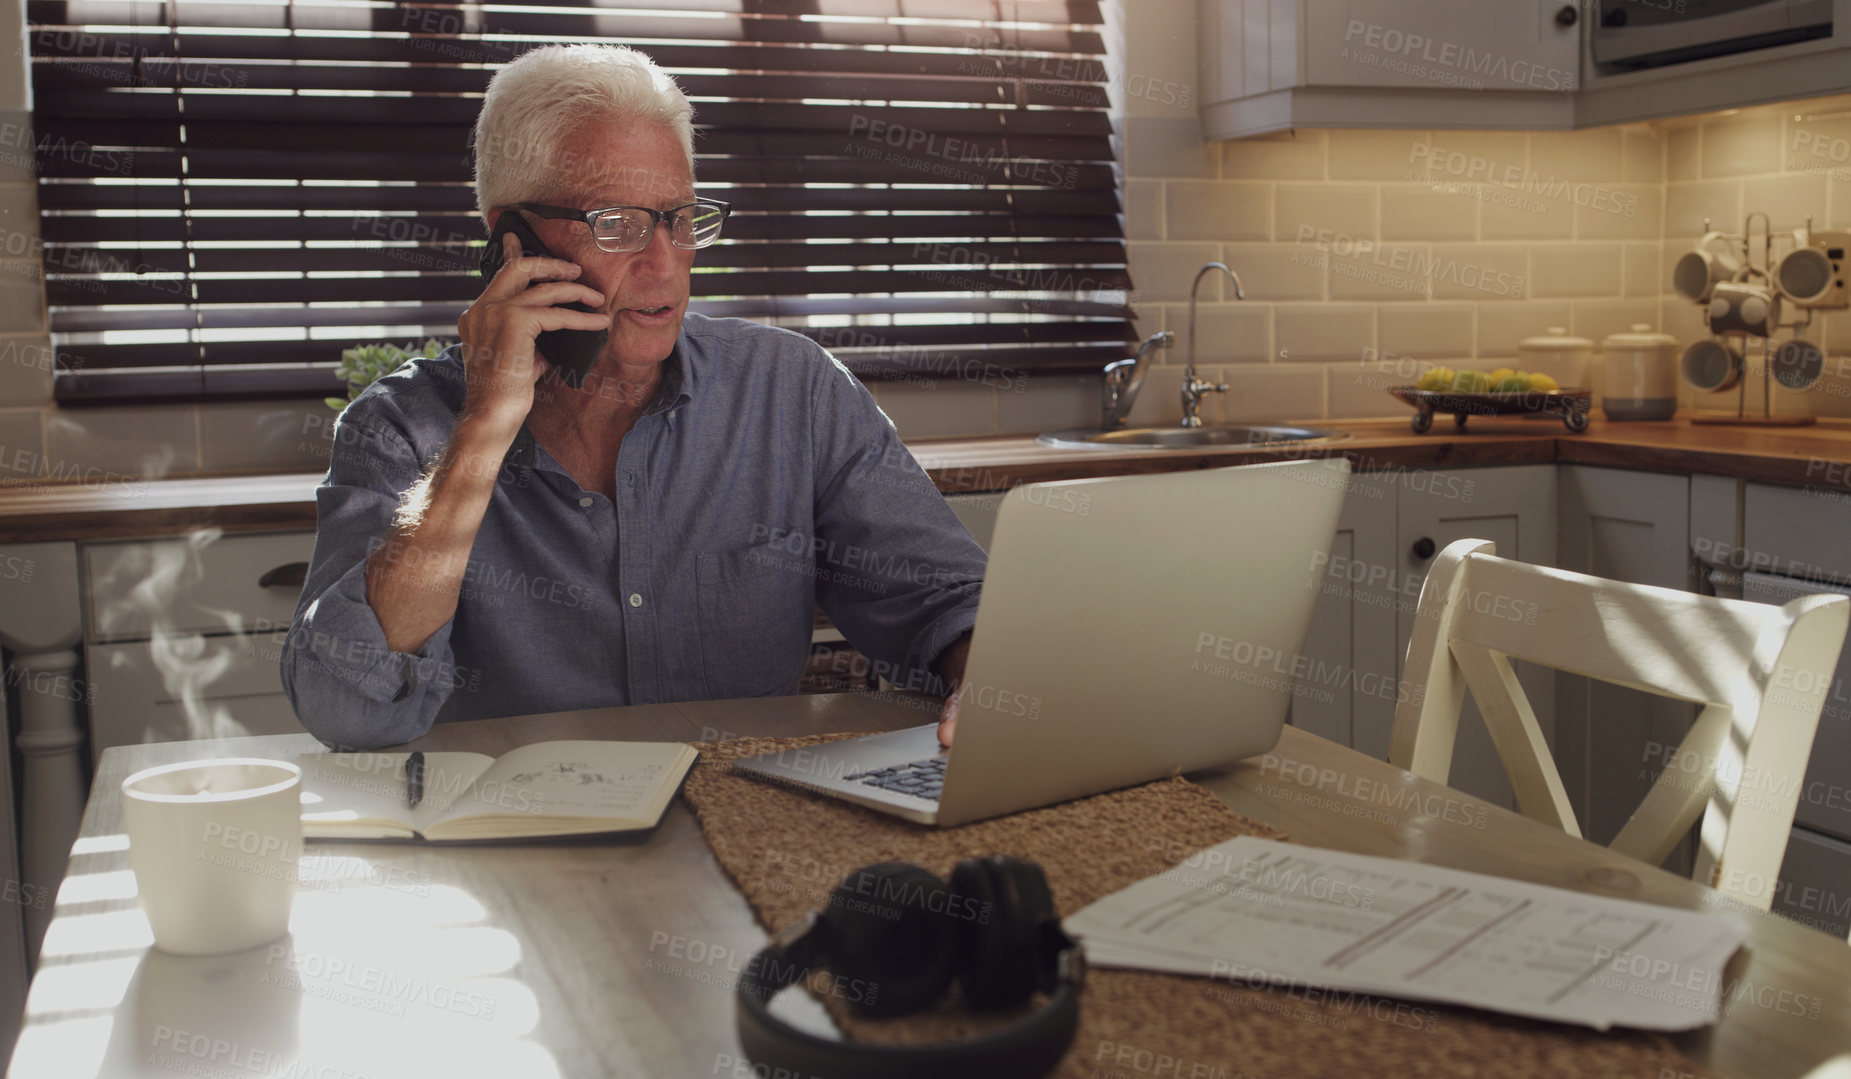 Buy stock photo Shot of a senior man sitting alone in the kitchen and using technology to work from home